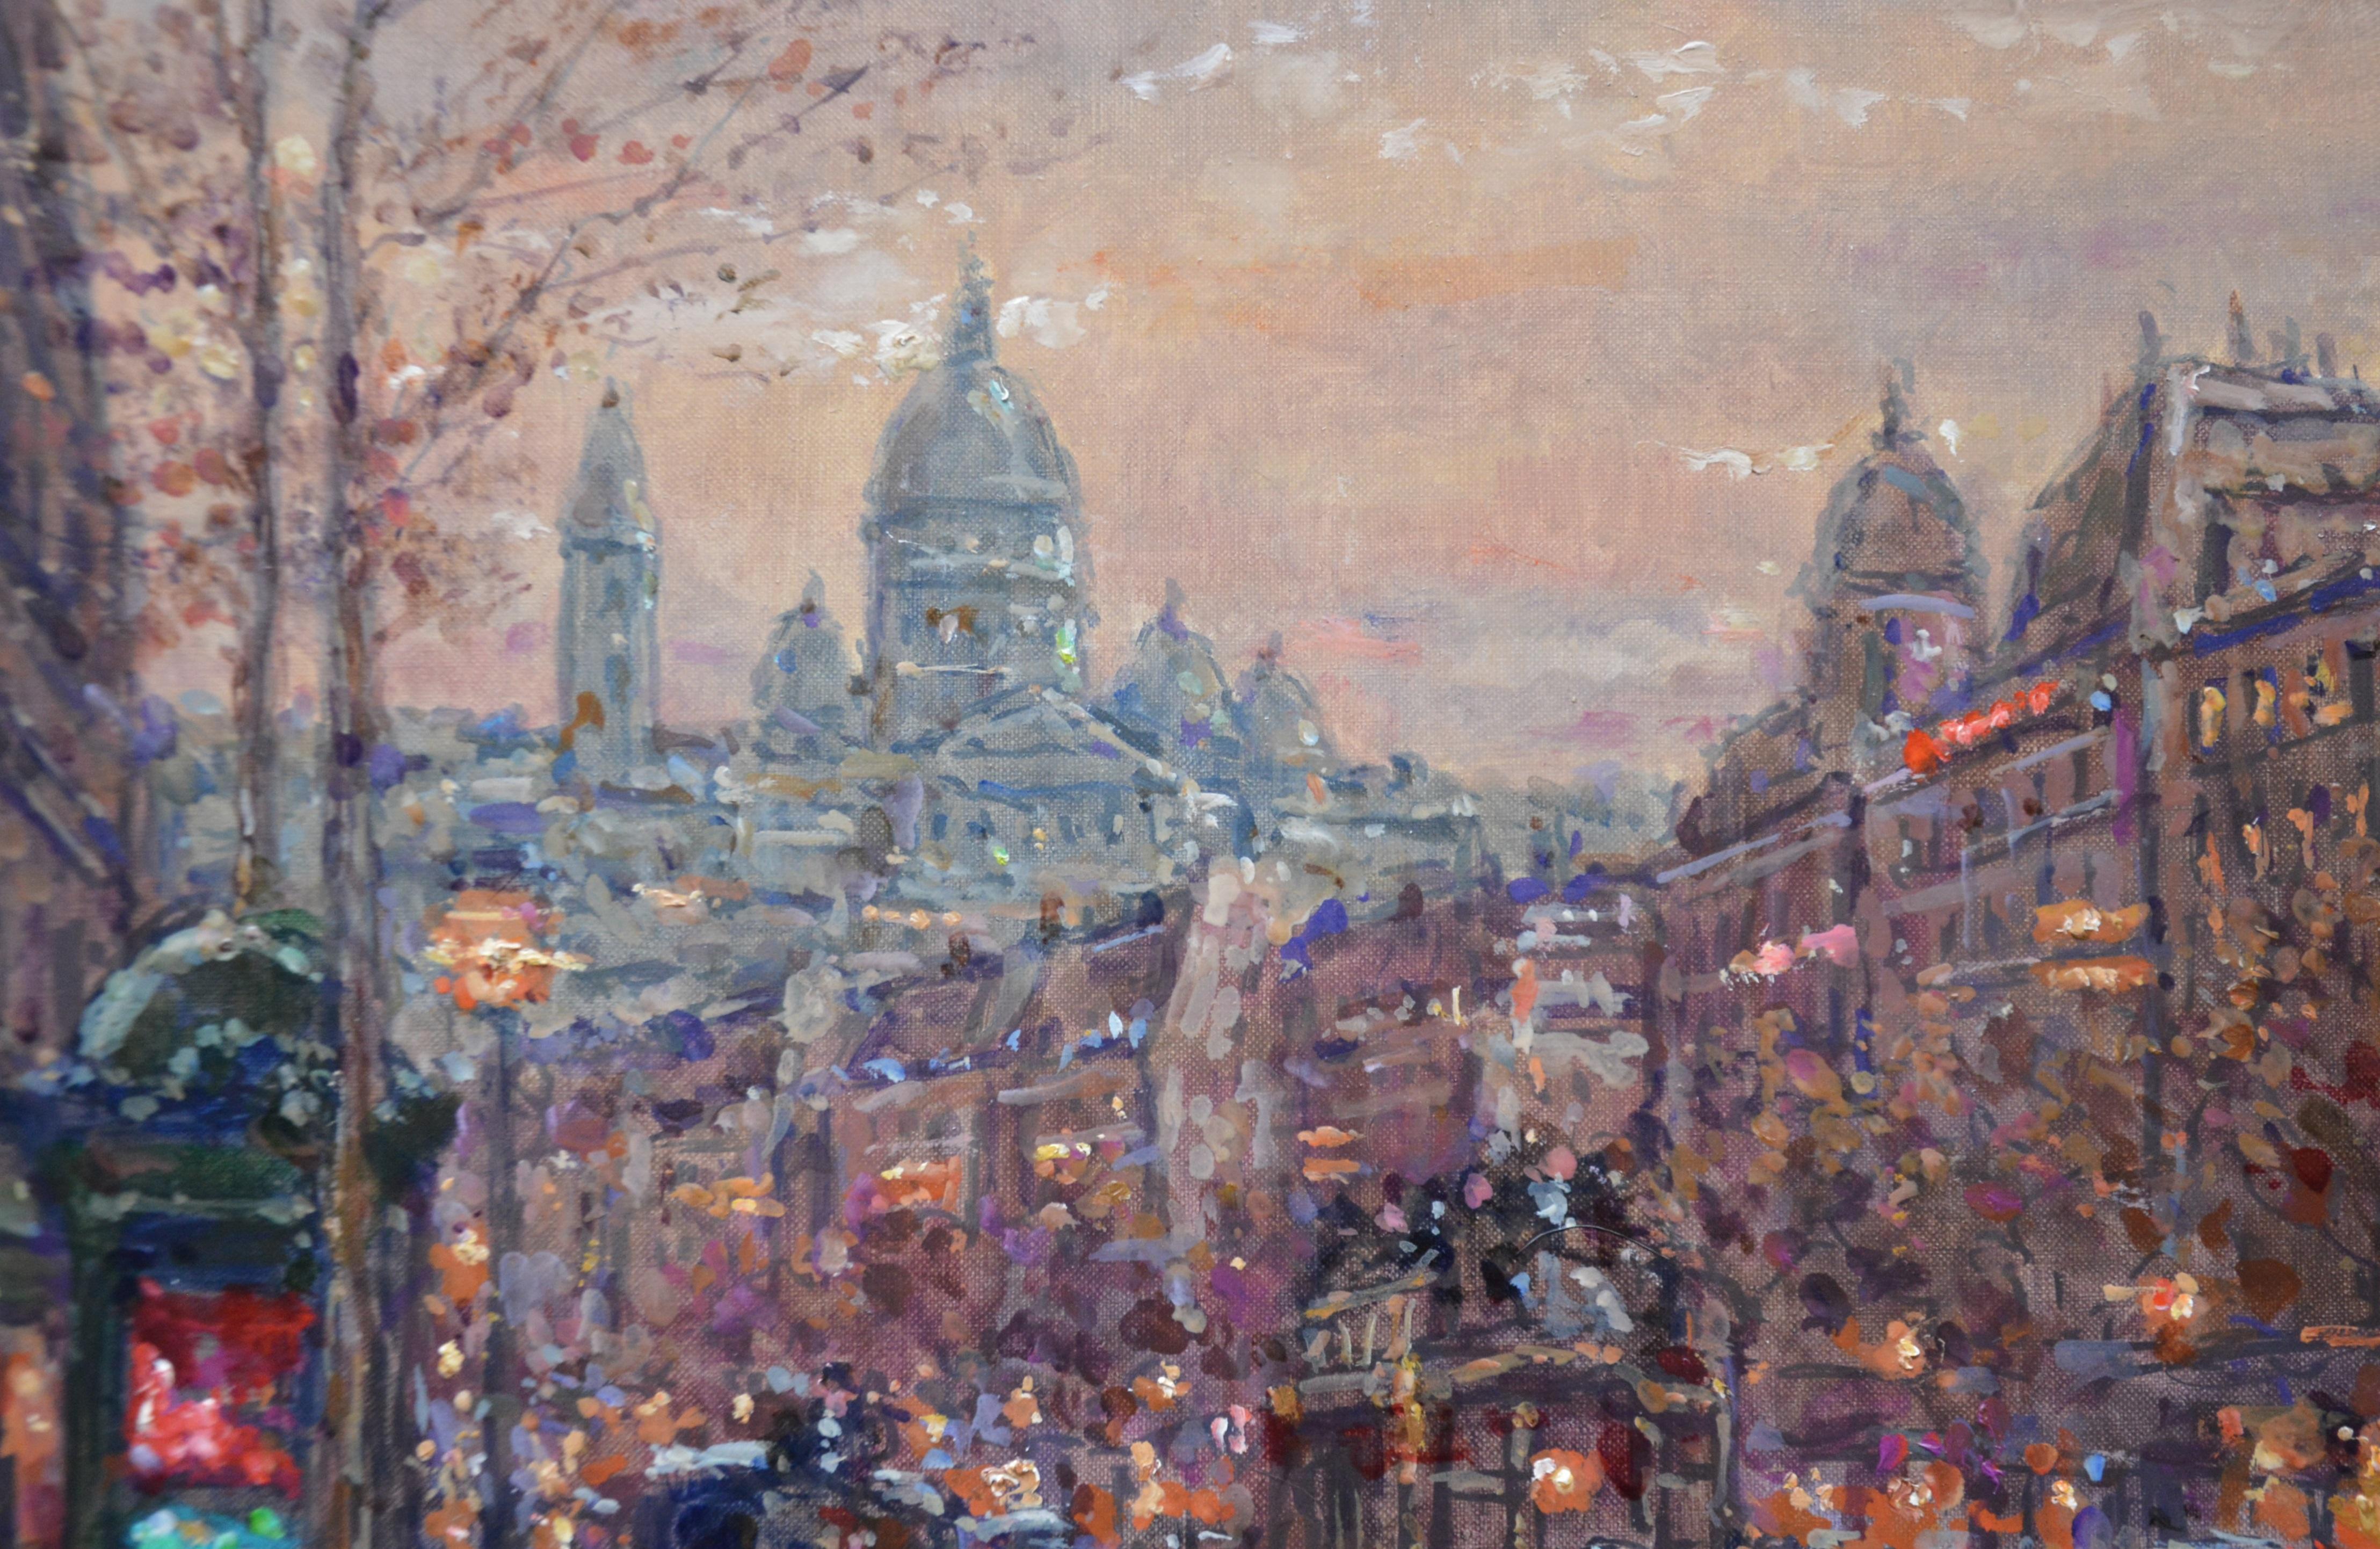 ‘Les Grand Boulevard au Crépuscule’ by Andre Boyer (1909-1981). 

The painting – which depicts a Belle Epoque scene of the Grand Boulevard in Paris at dusk – is signed by the artist and presented in a newly commissioned post-impressionist frame. 